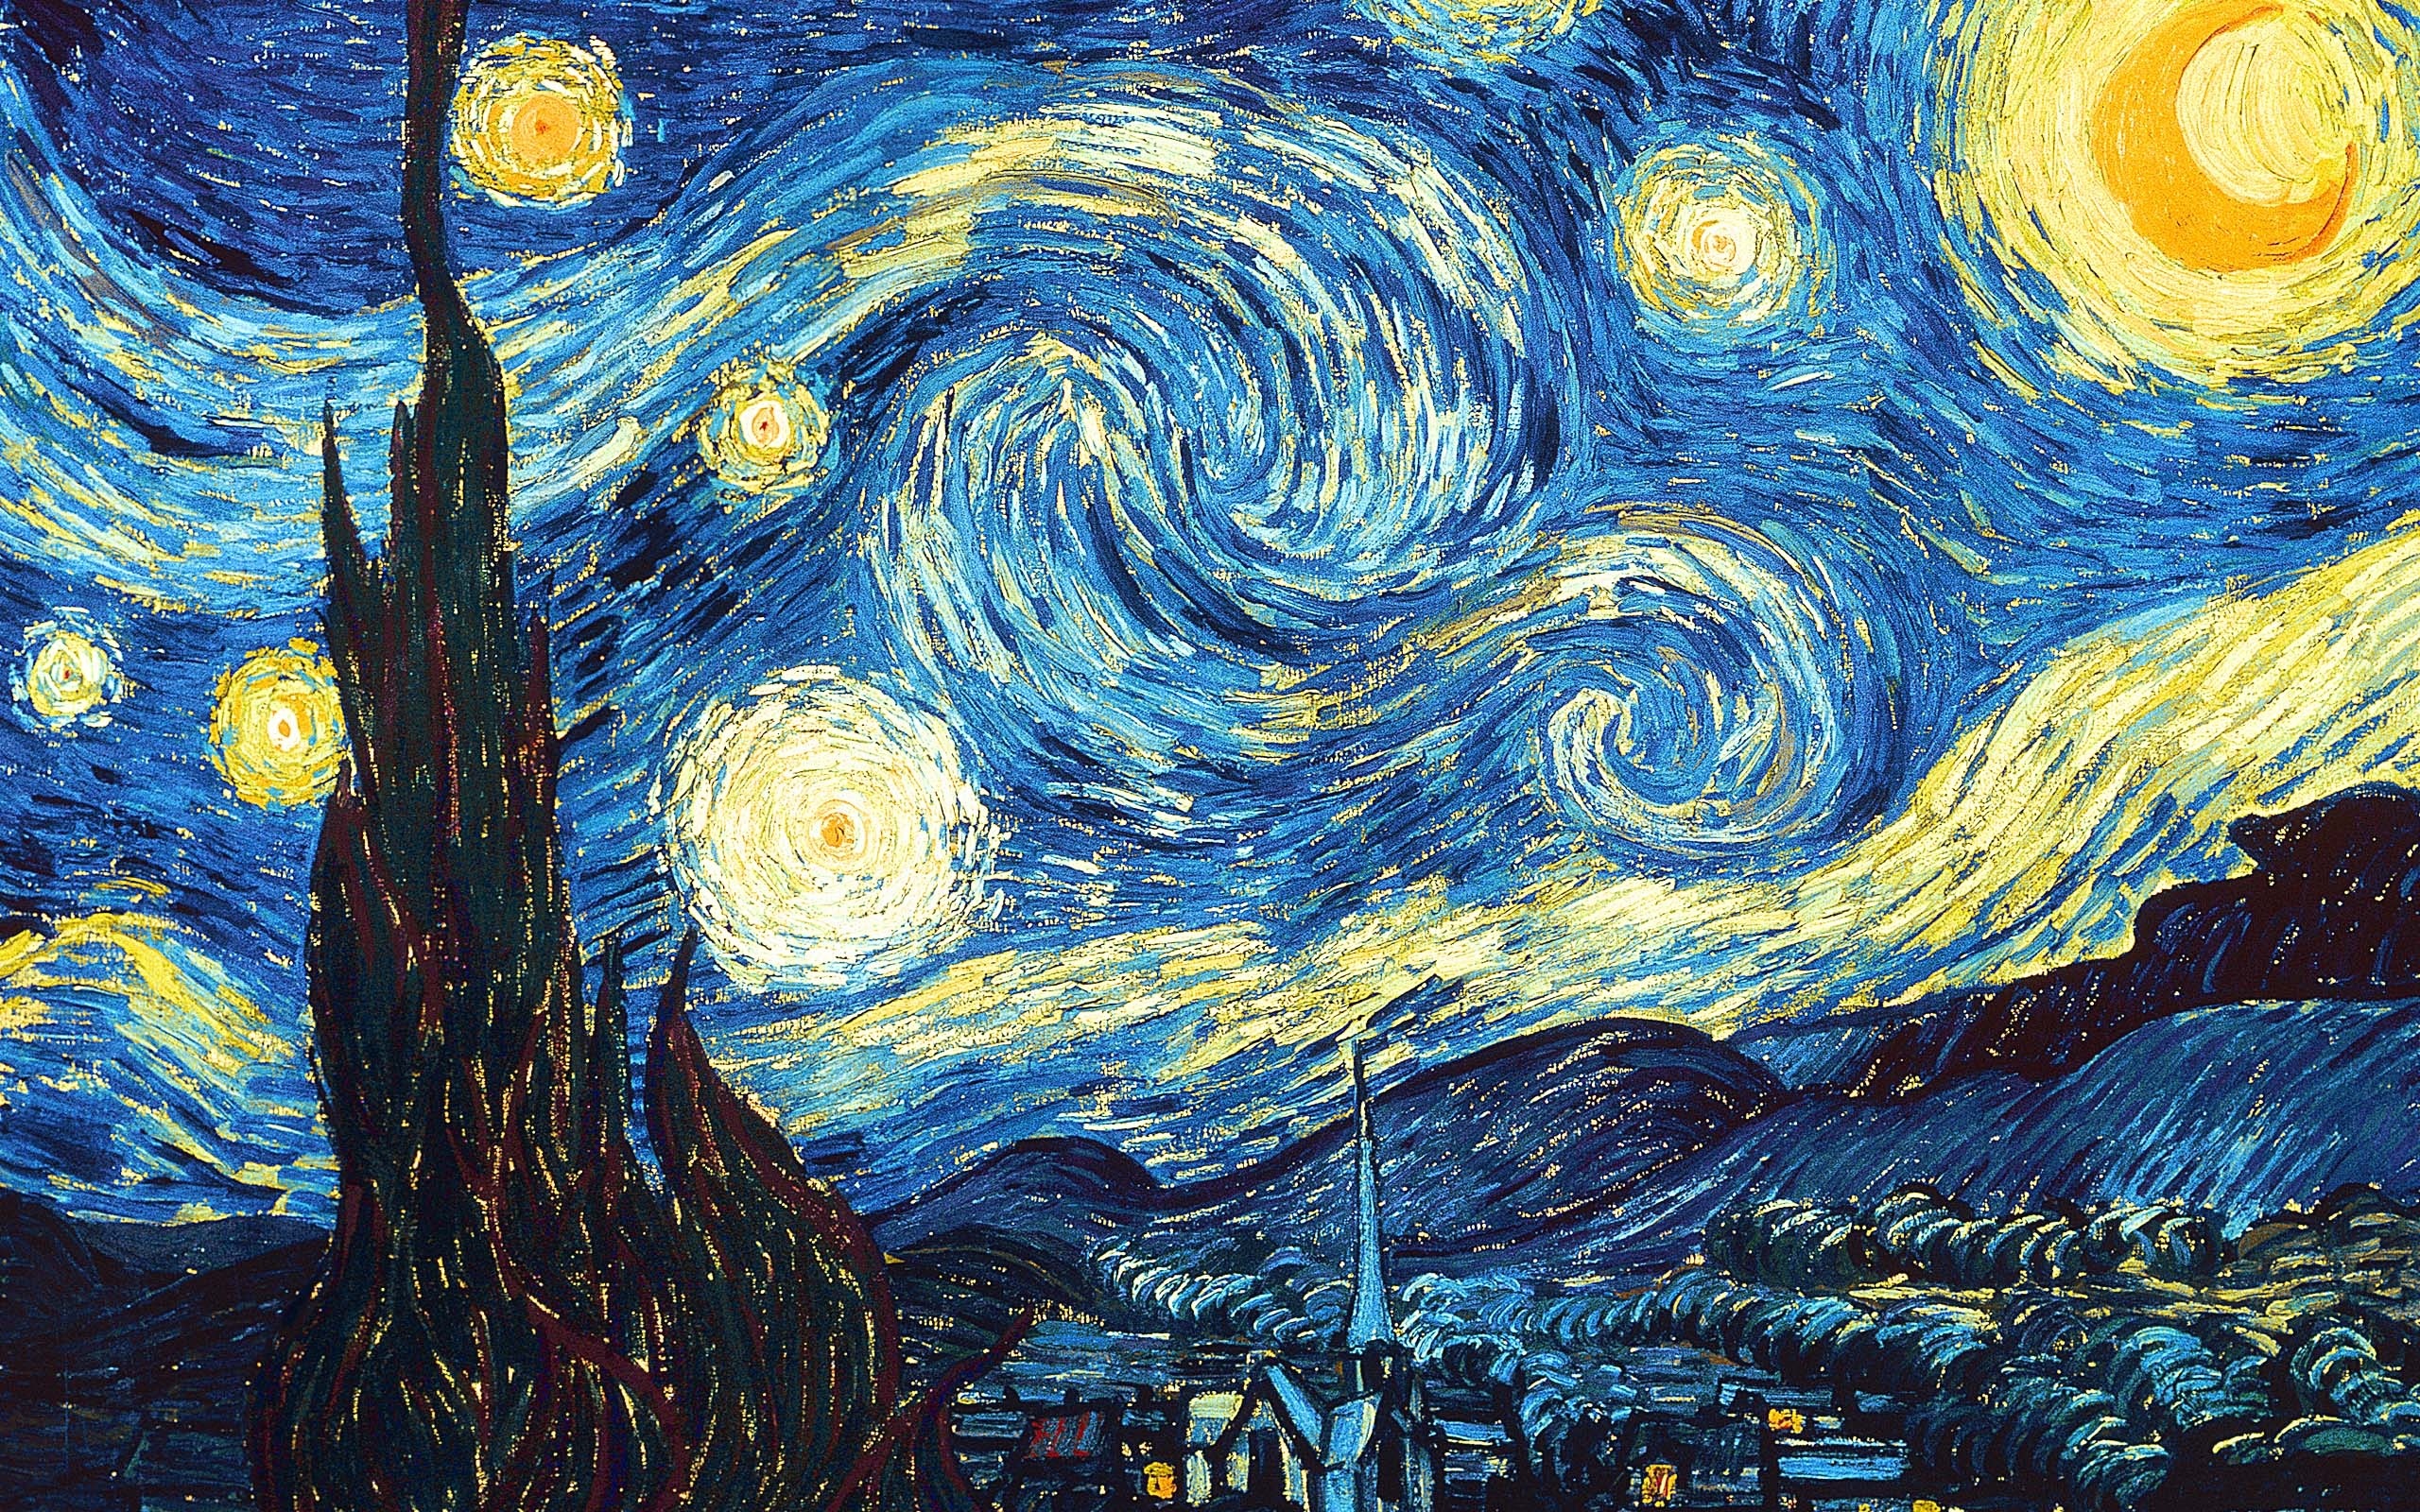 Vincent van Gogh wallpapers, Artistic expressions, Timeless beauty, Masterful strokes, 2560x1600 HD Desktop